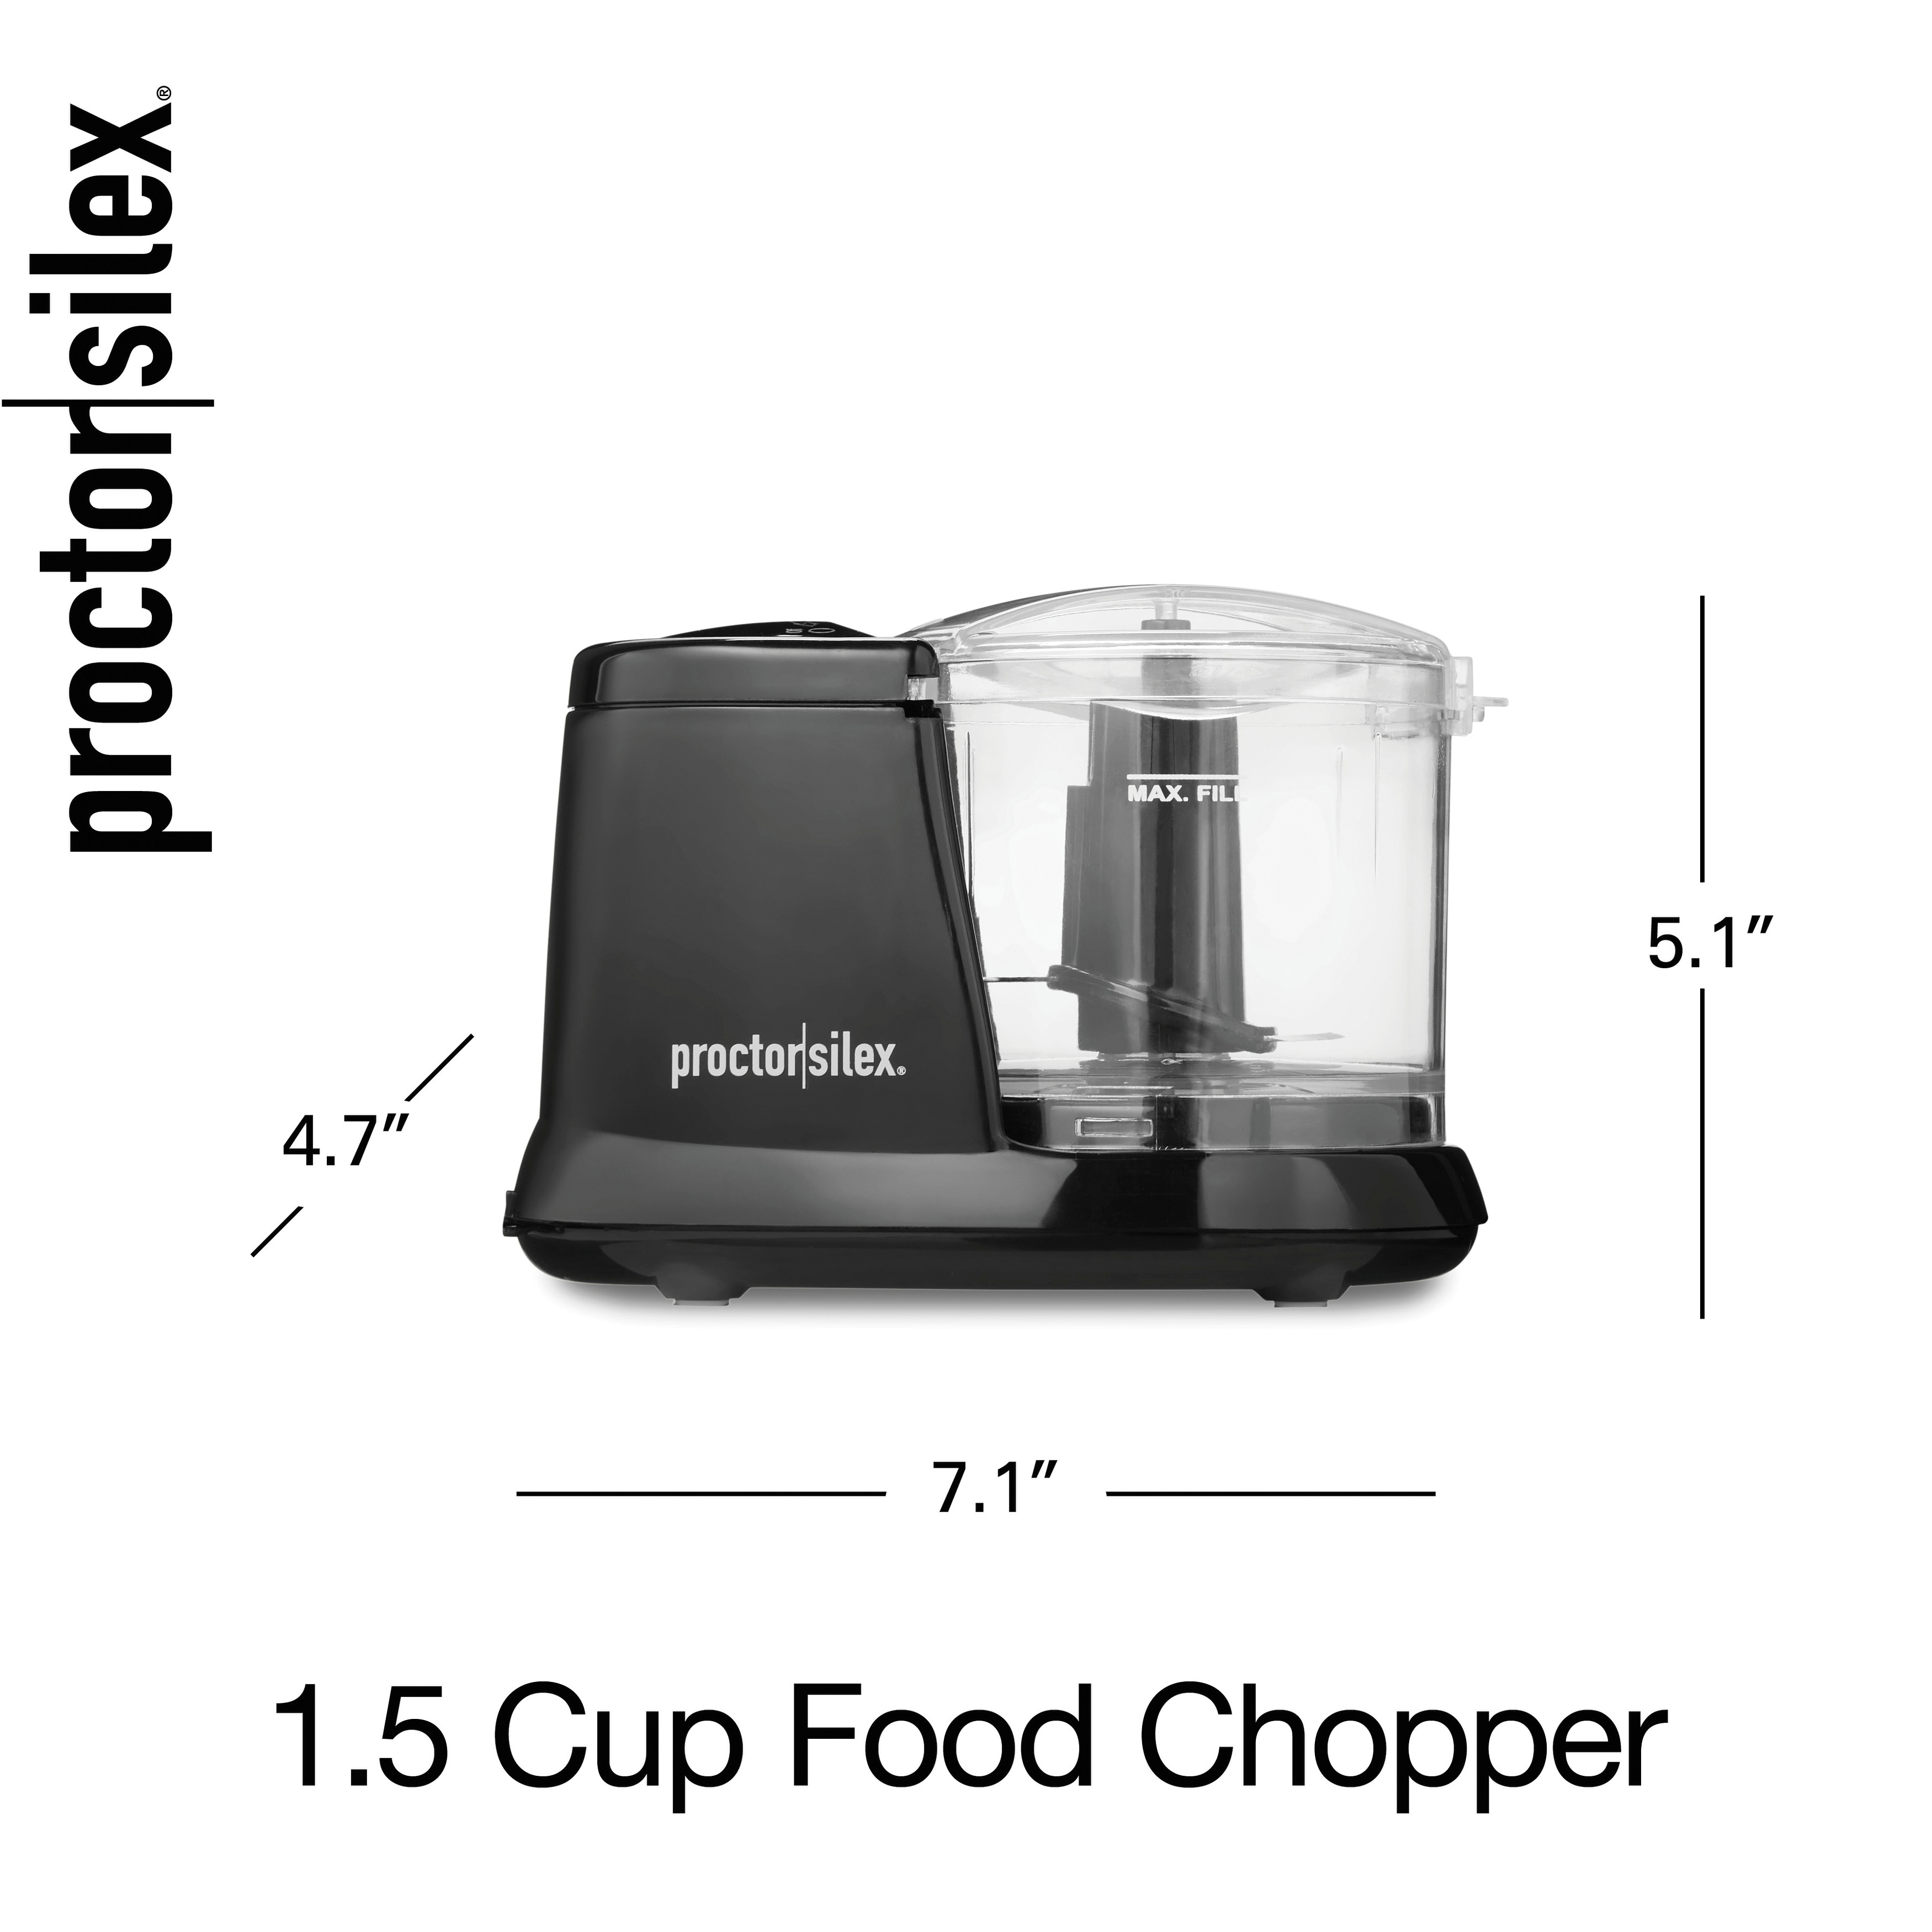 https://ak1.ostkcdn.com/images/products/is/images/direct/2ba73c2bc14bba99fbef6a99cf3c50c309124262/Proctor-Silex-Black-1.5-Cup-Food-Chopper.jpg